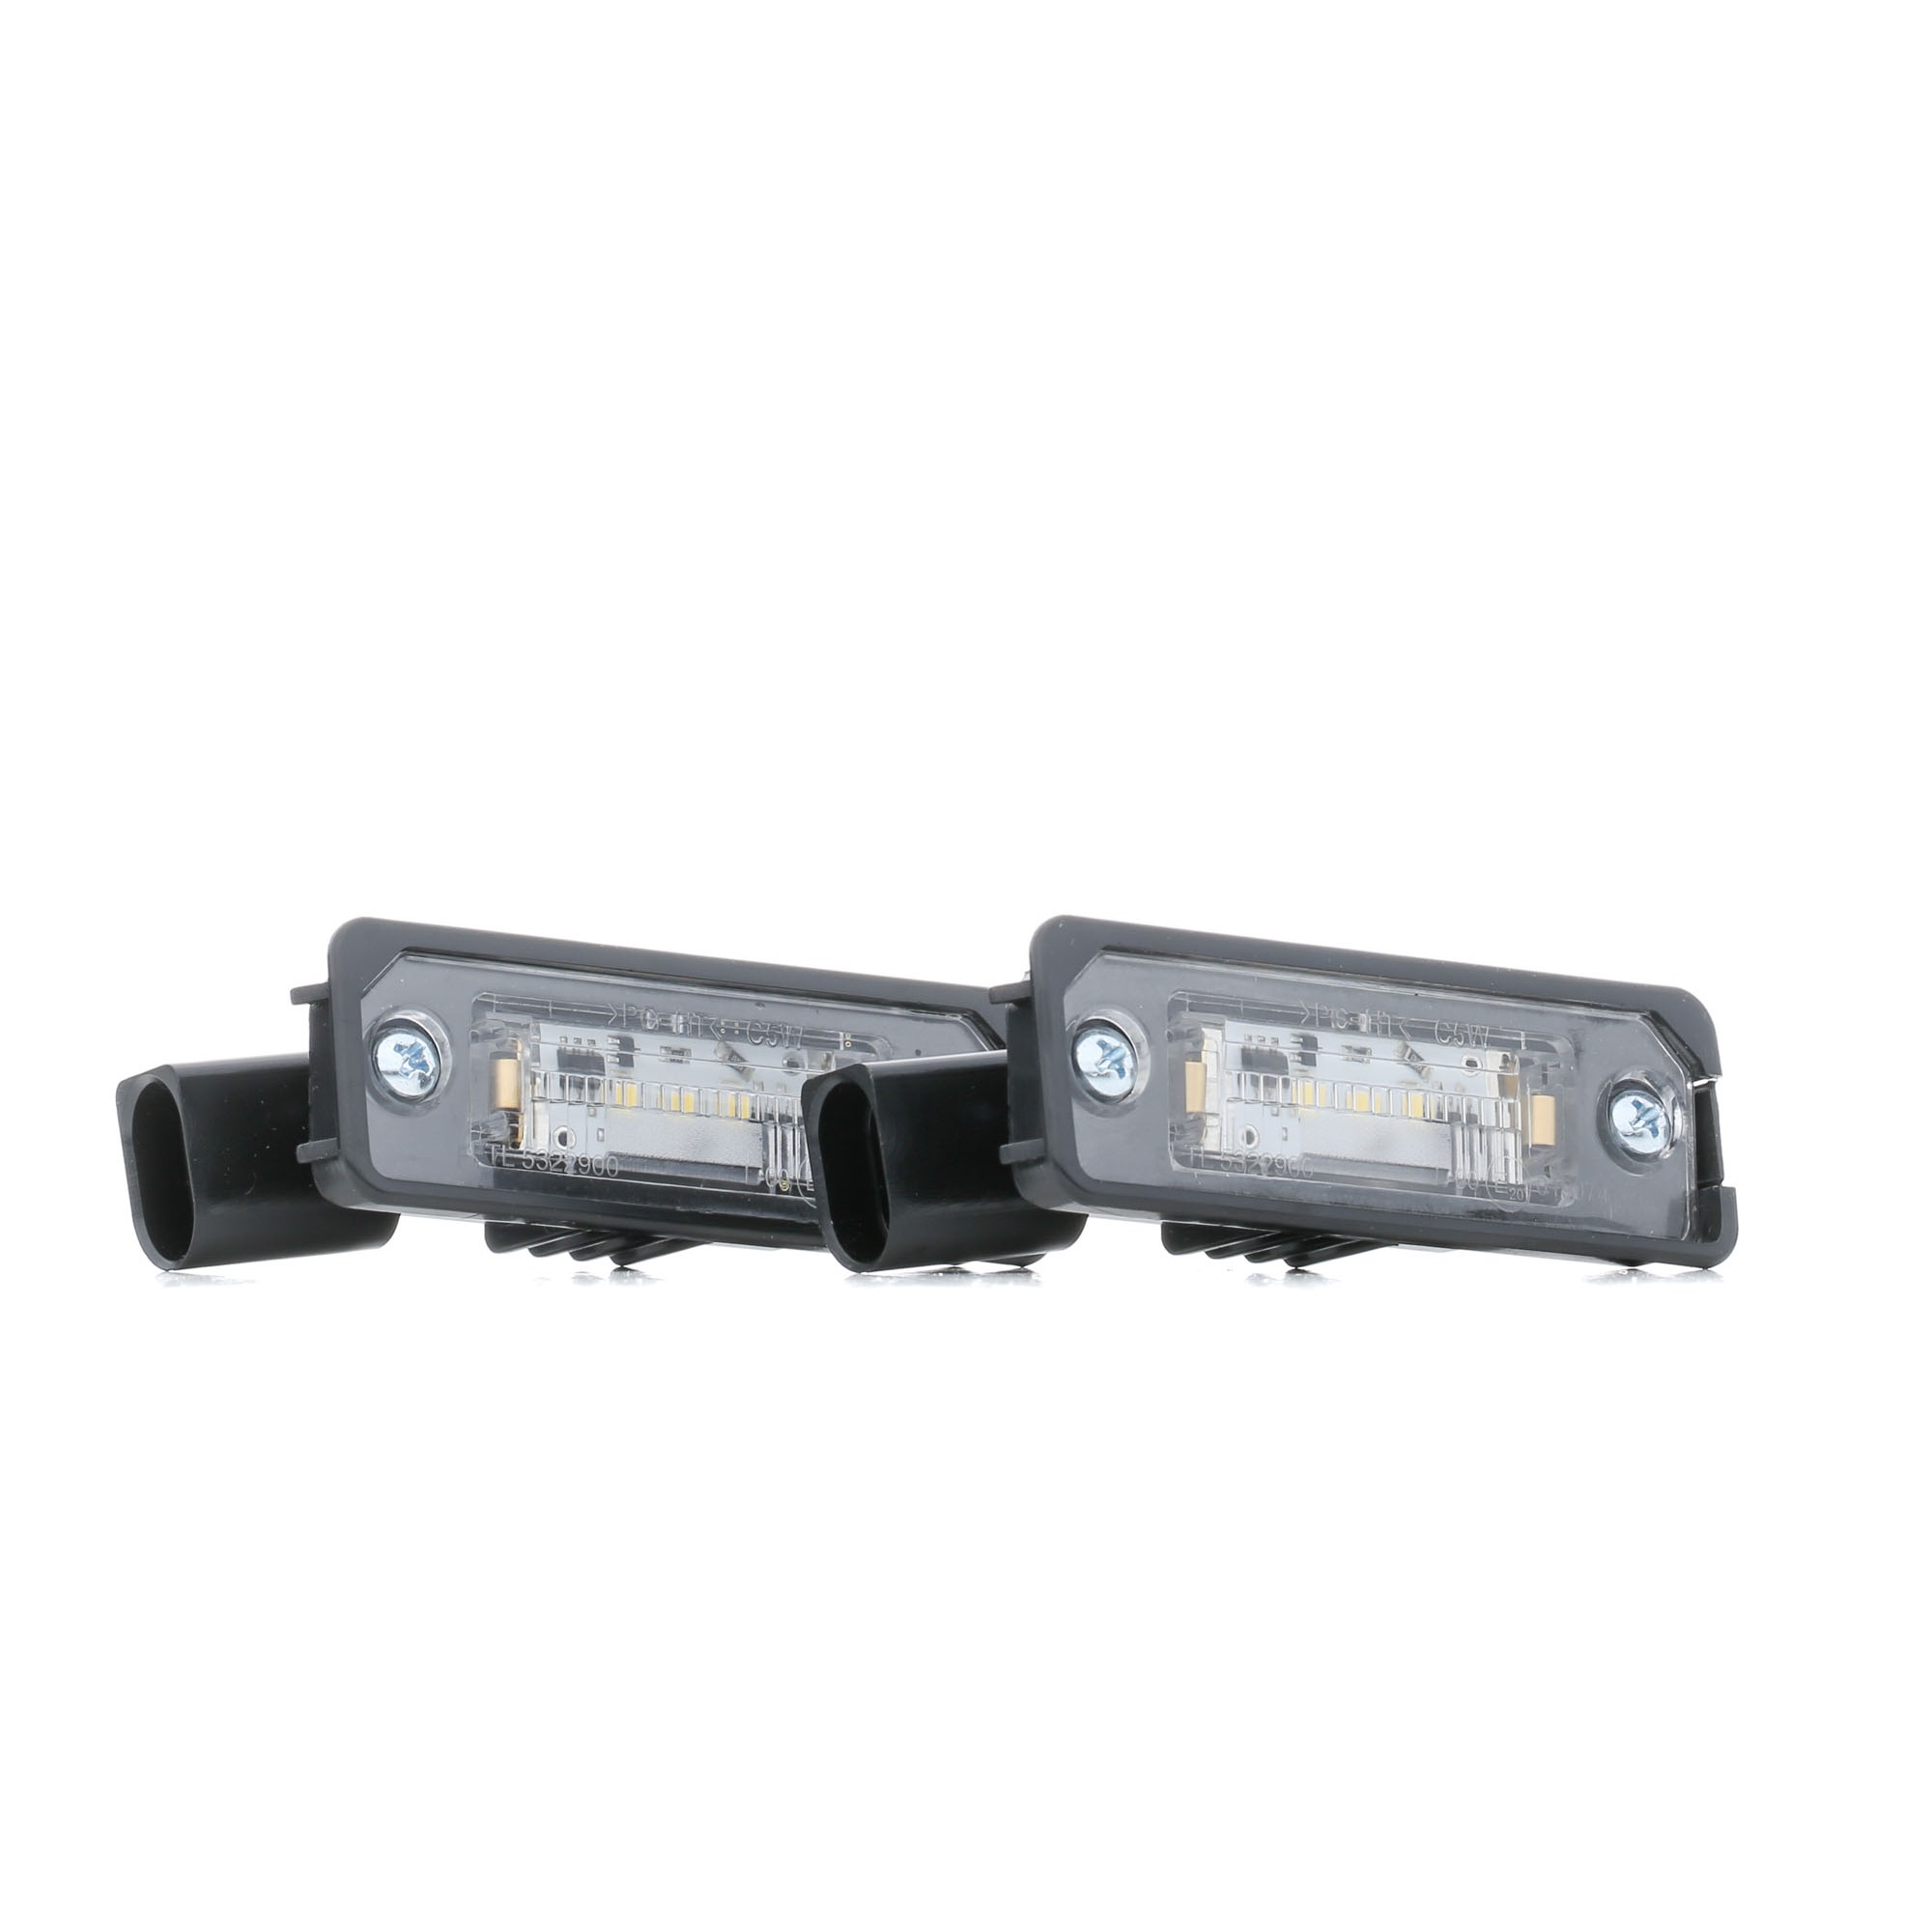 BLIC 5402-053-22-910 Licence Plate Light BMW experience and price